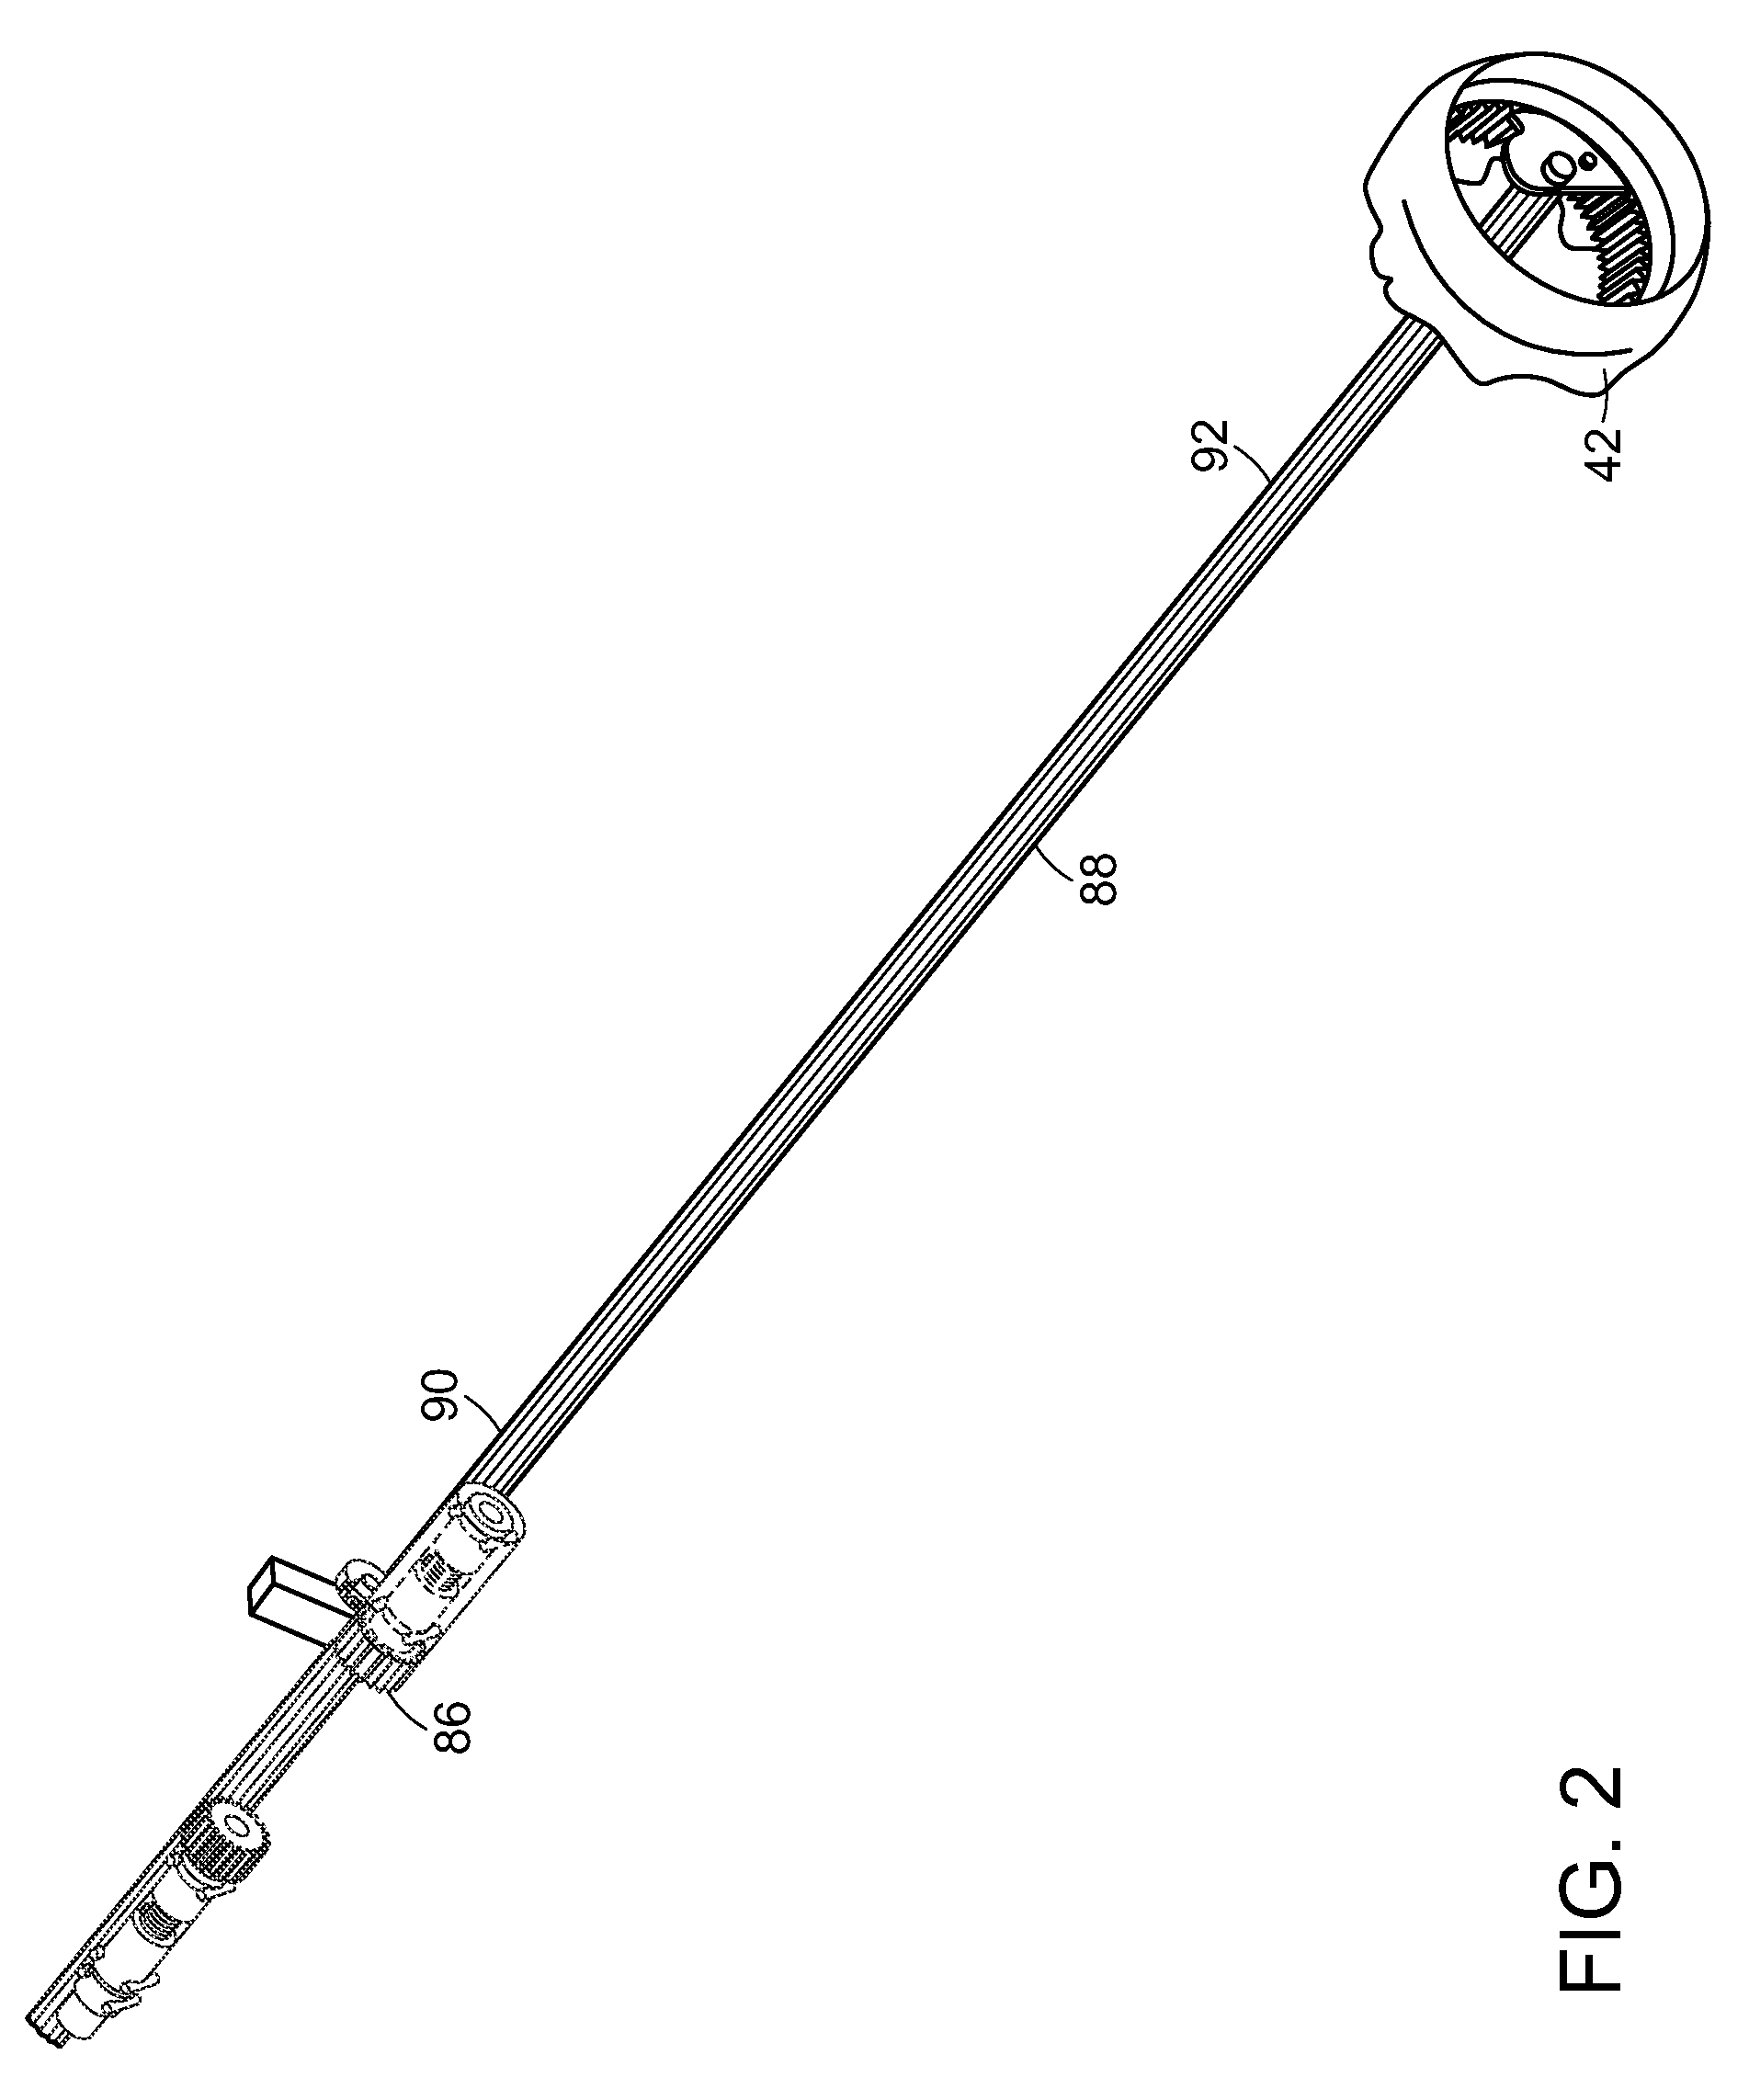 Vascular prosthetic delivery device and method of use